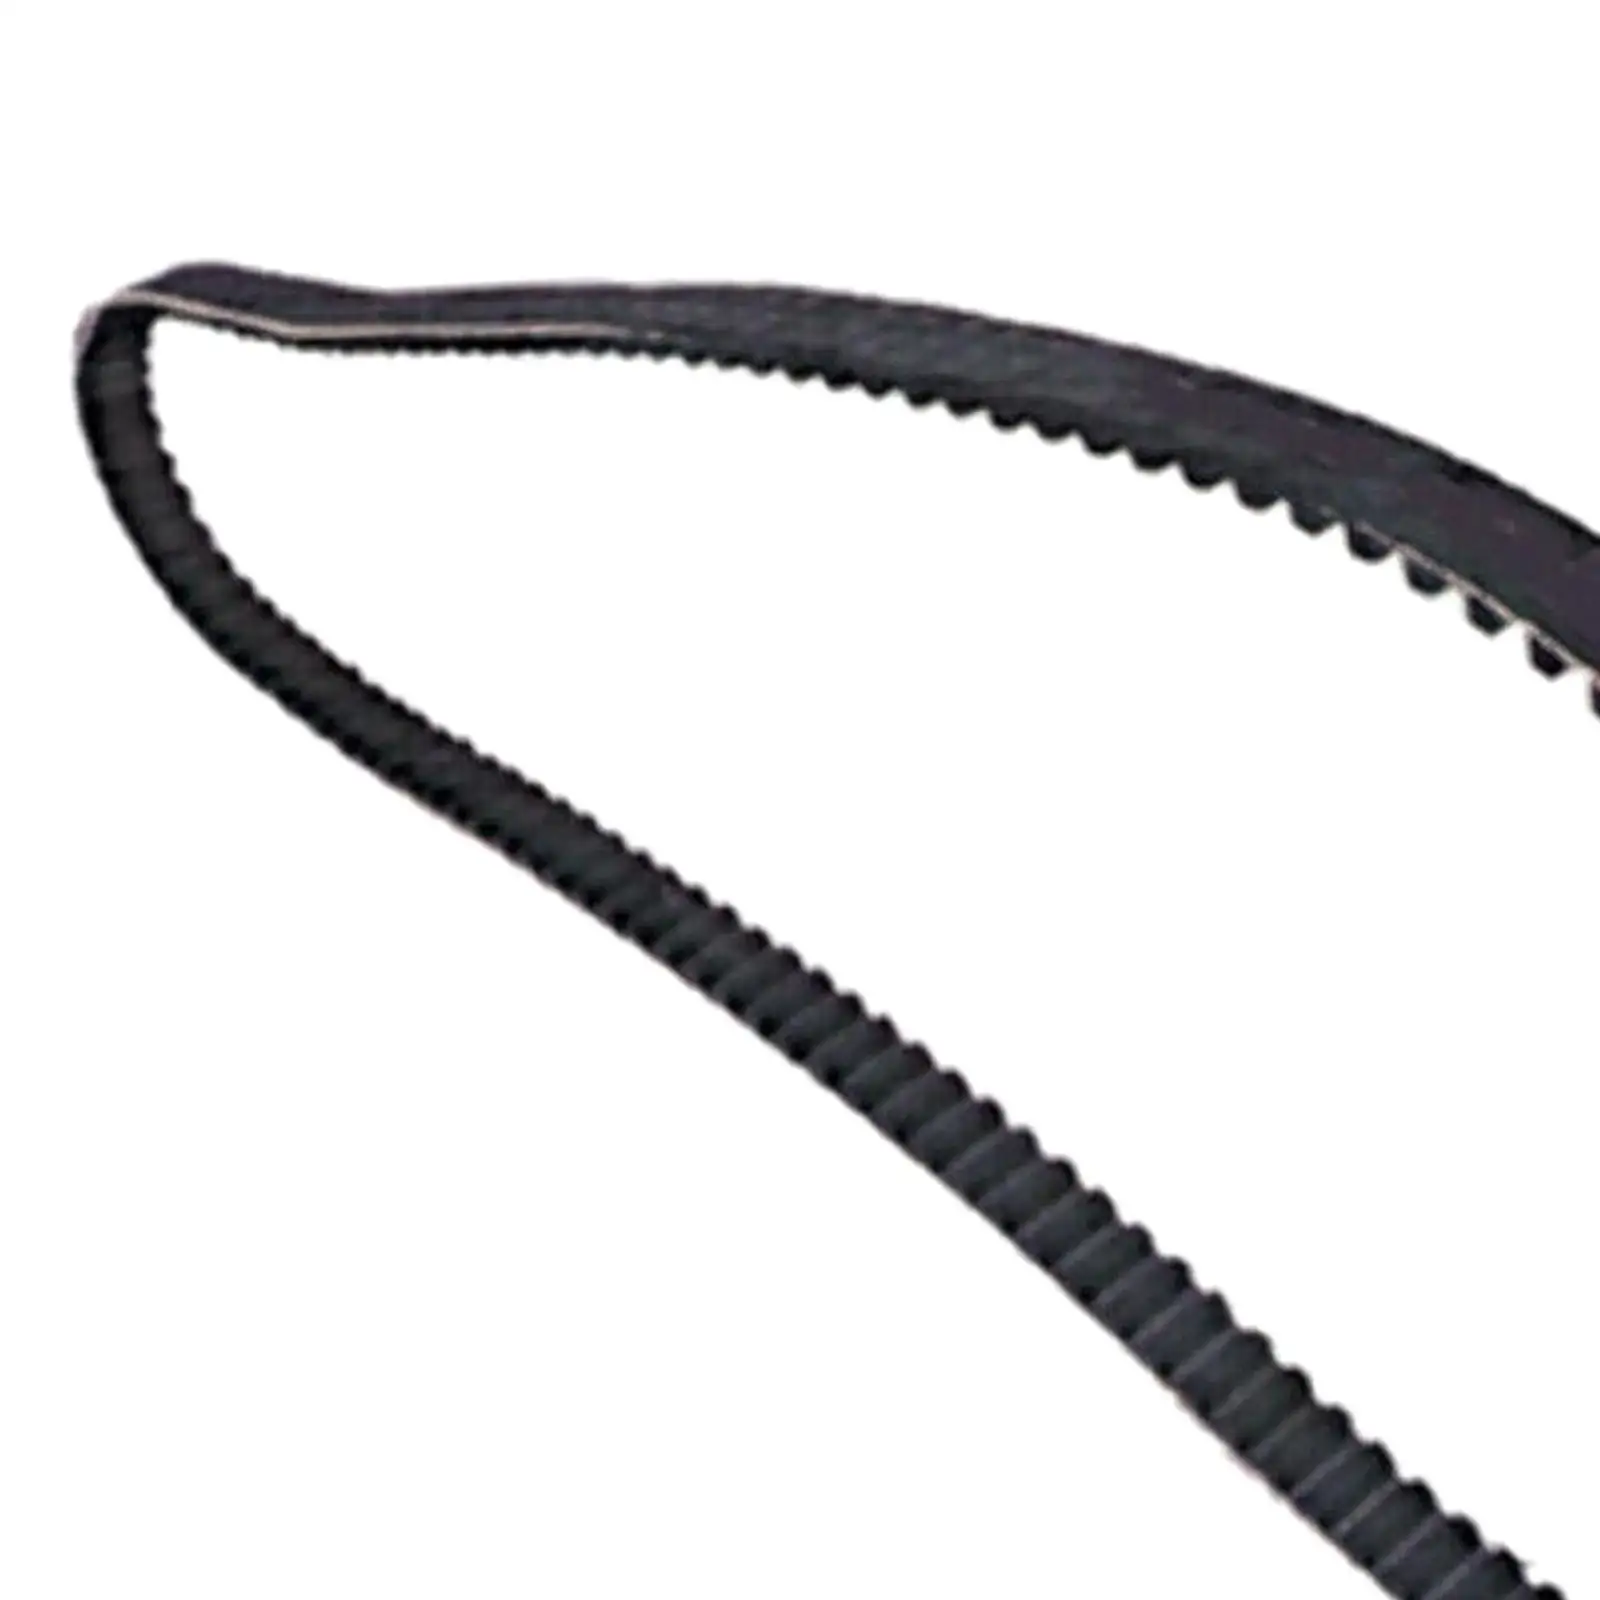 Rear Drive Belt 1204-0051 133 Tooth 1 1/8